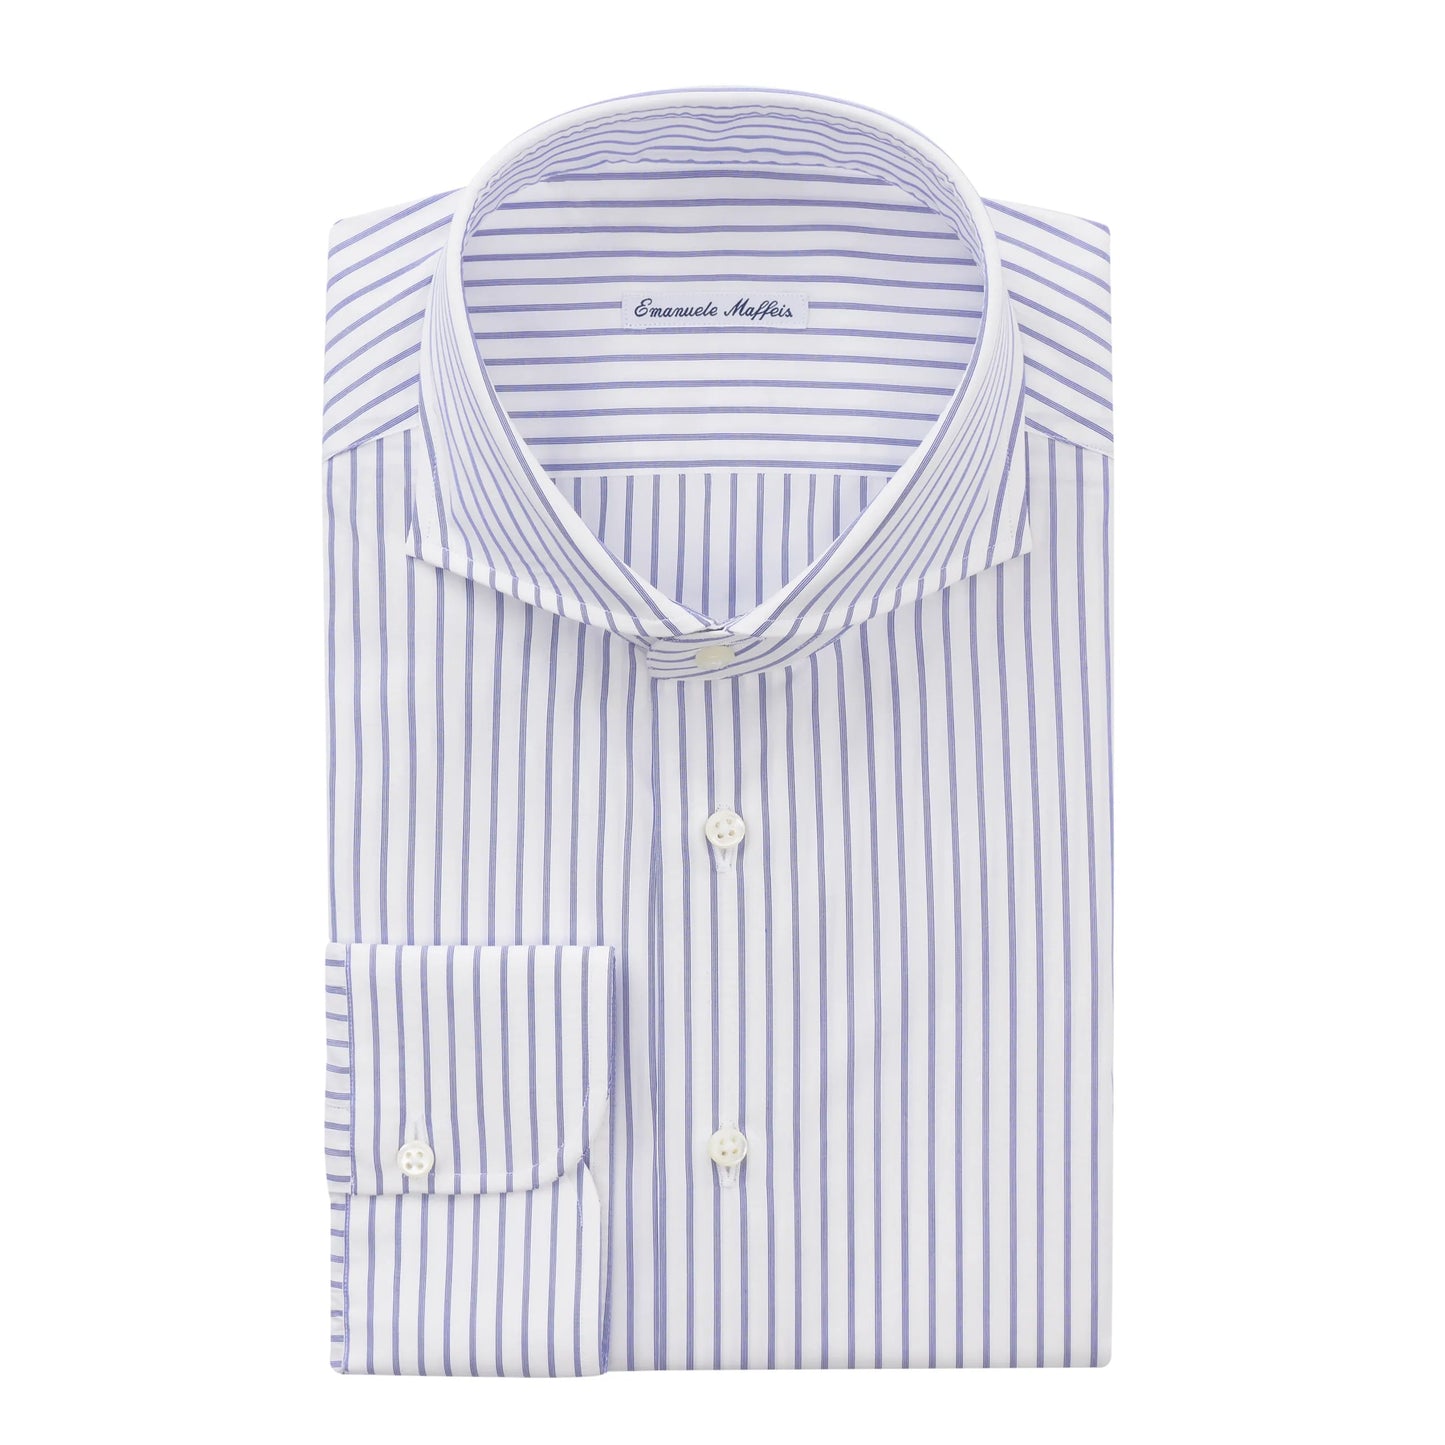 Emanuele Maffeis Striped Cotton White and Blue Shirt with Shark Collar - SARTALE